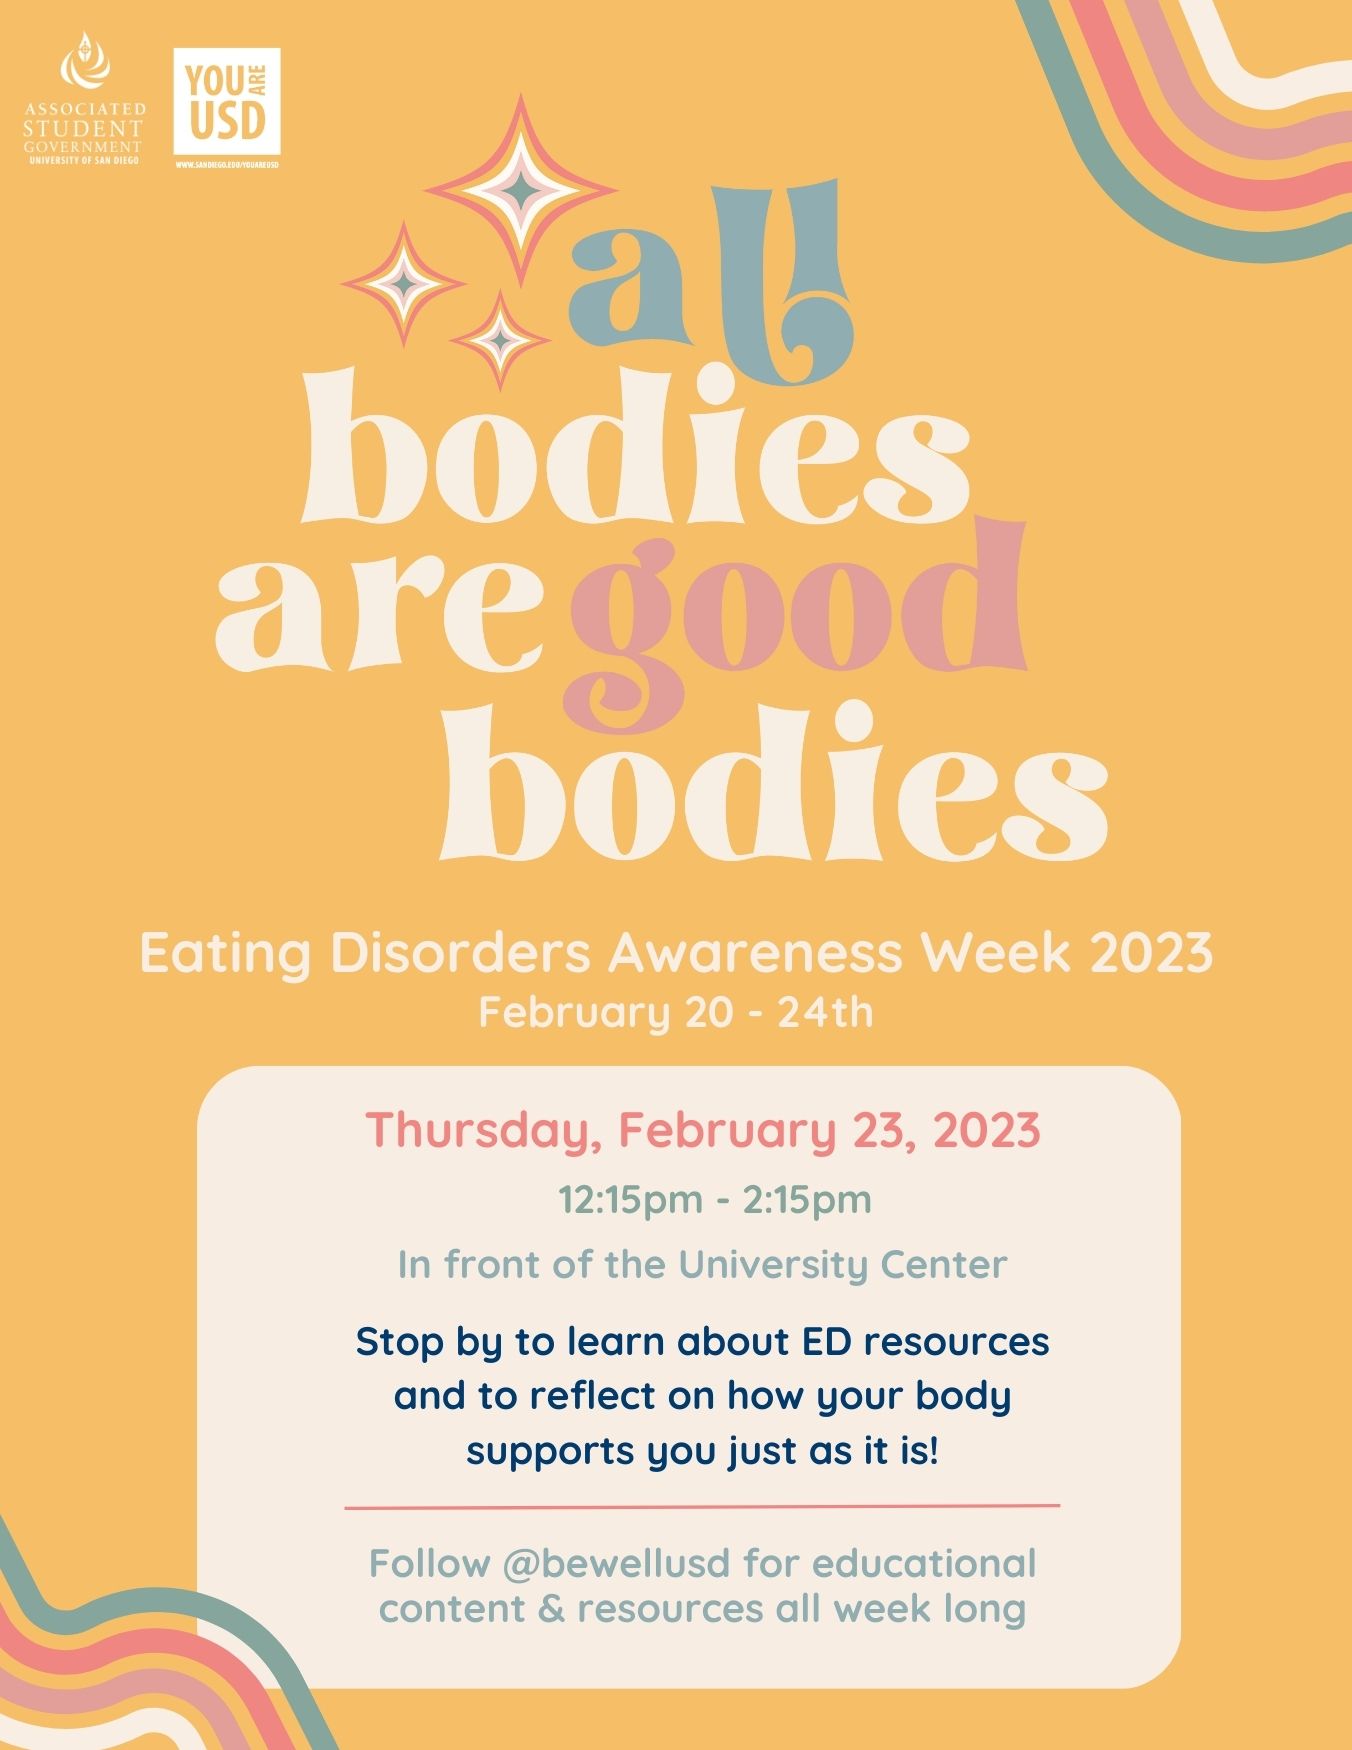 All Bodies Are Good Bodies flyer